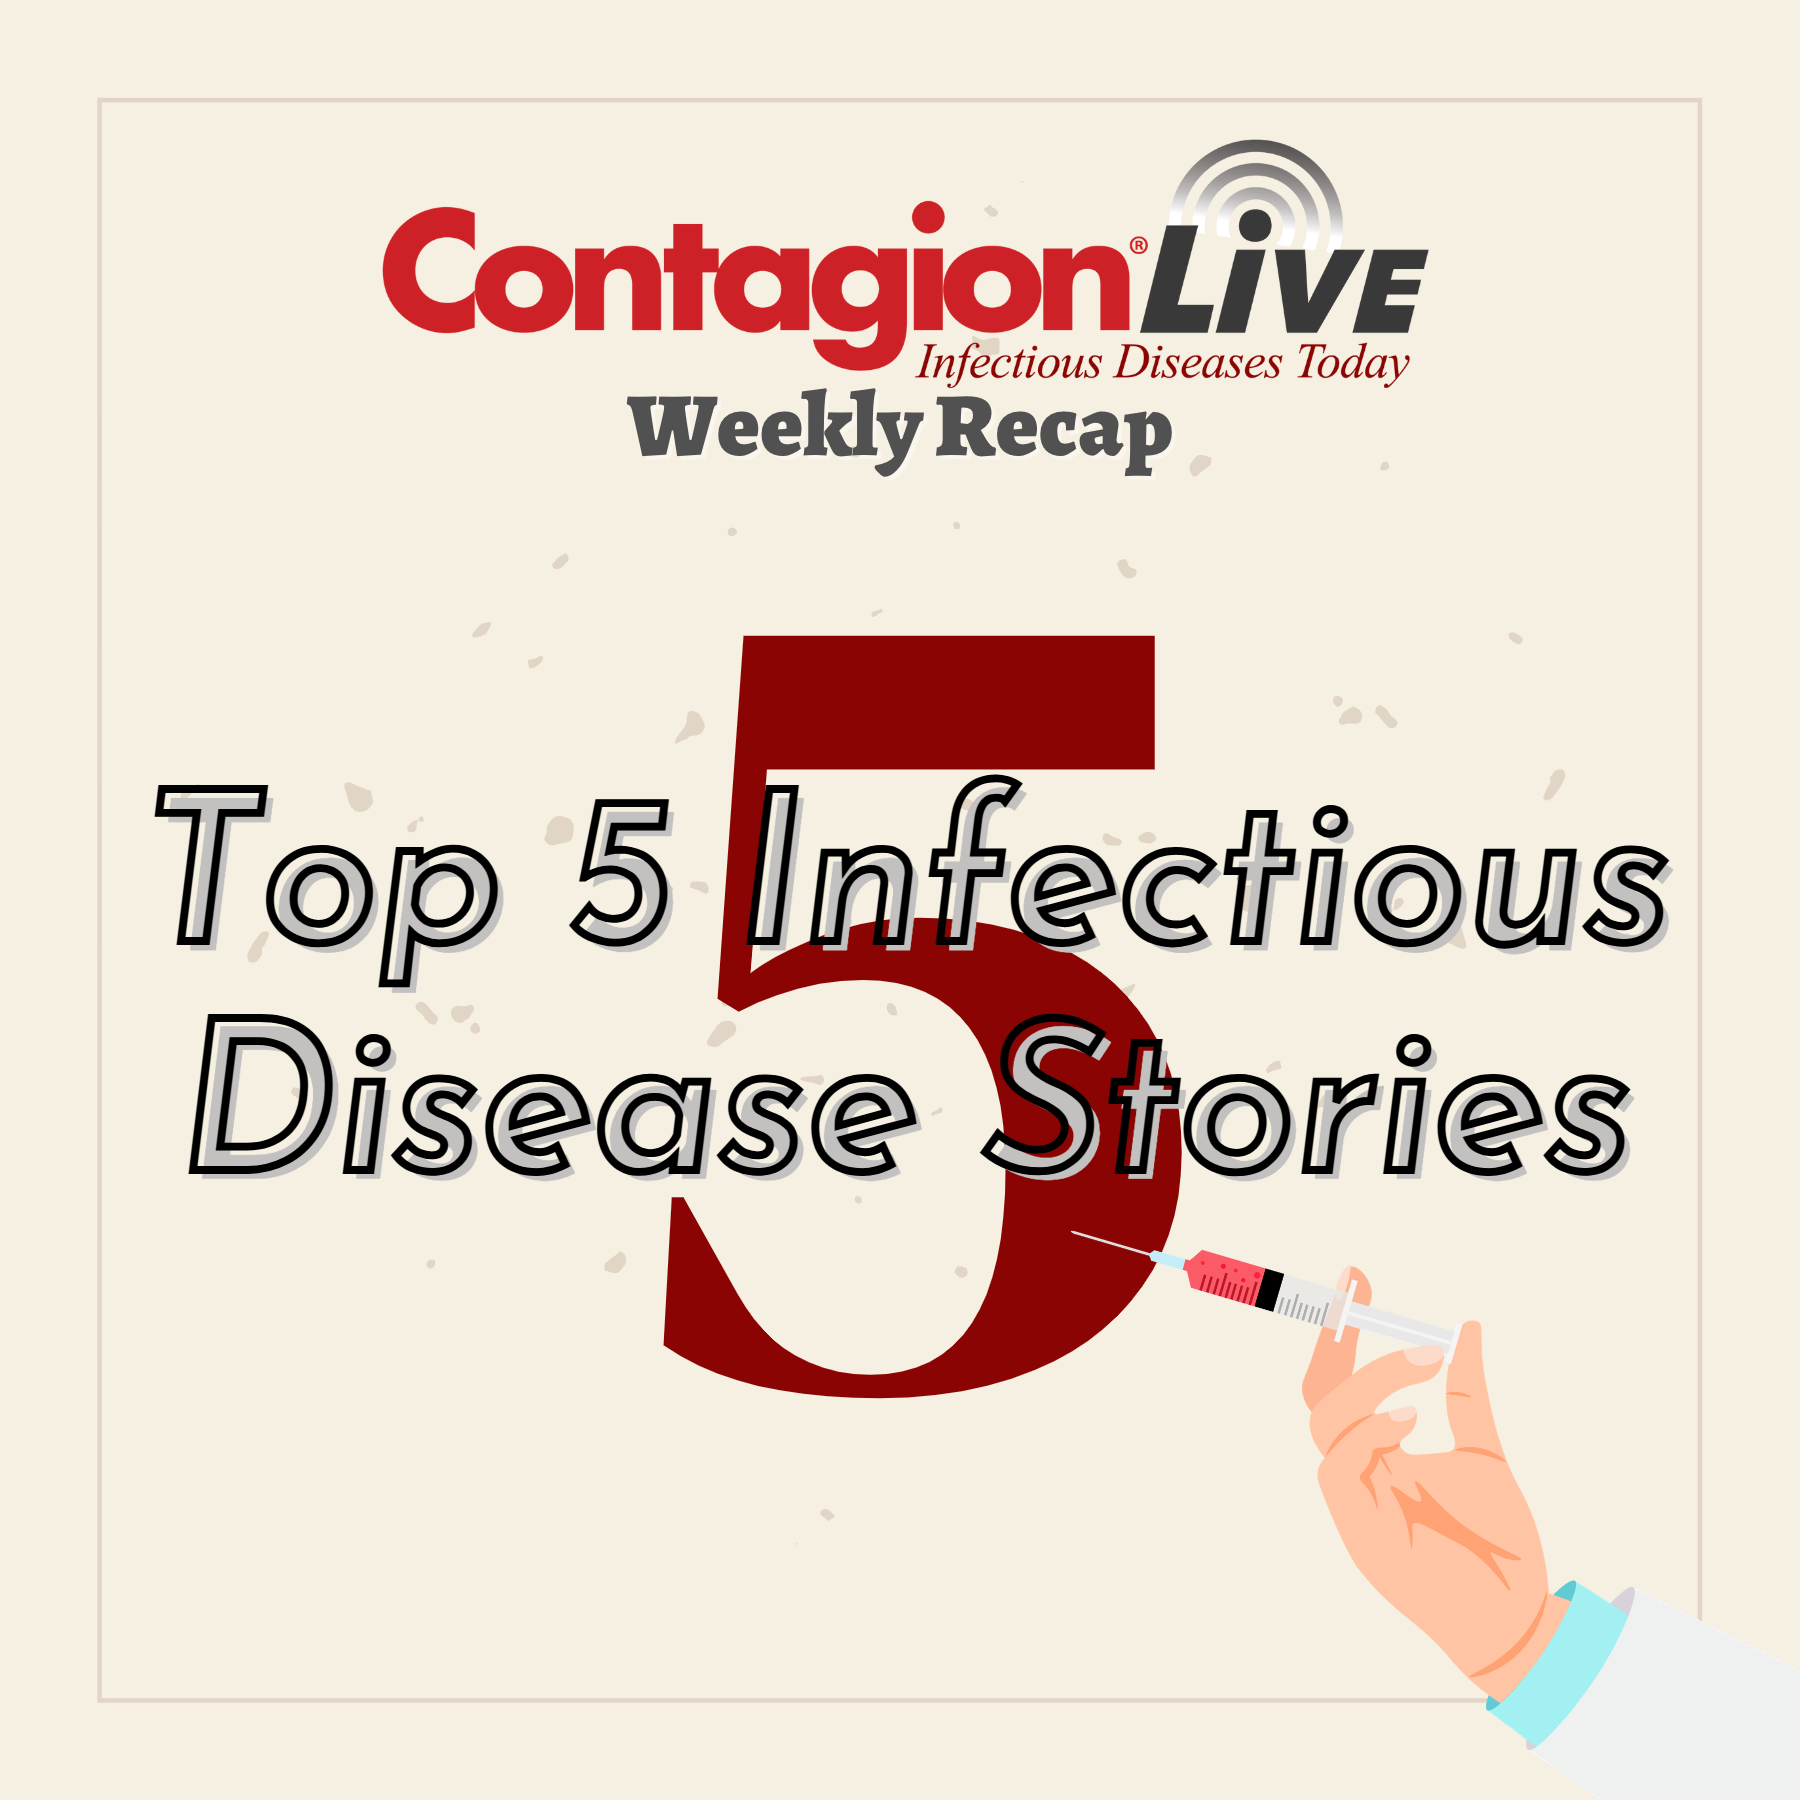 This week's most-clicked infectious disease stories.